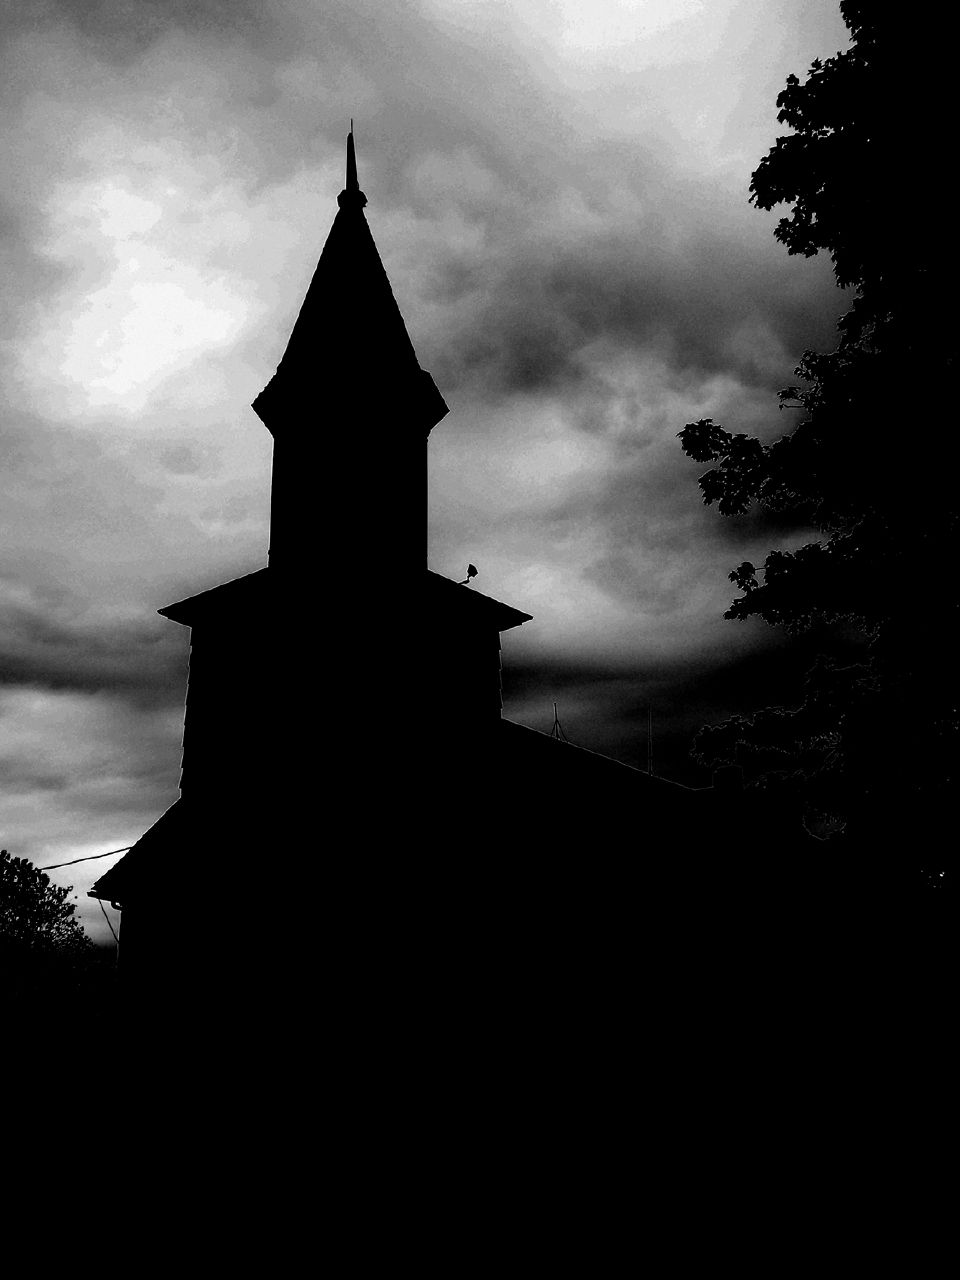 black and white po of a church spire with dark skies behind